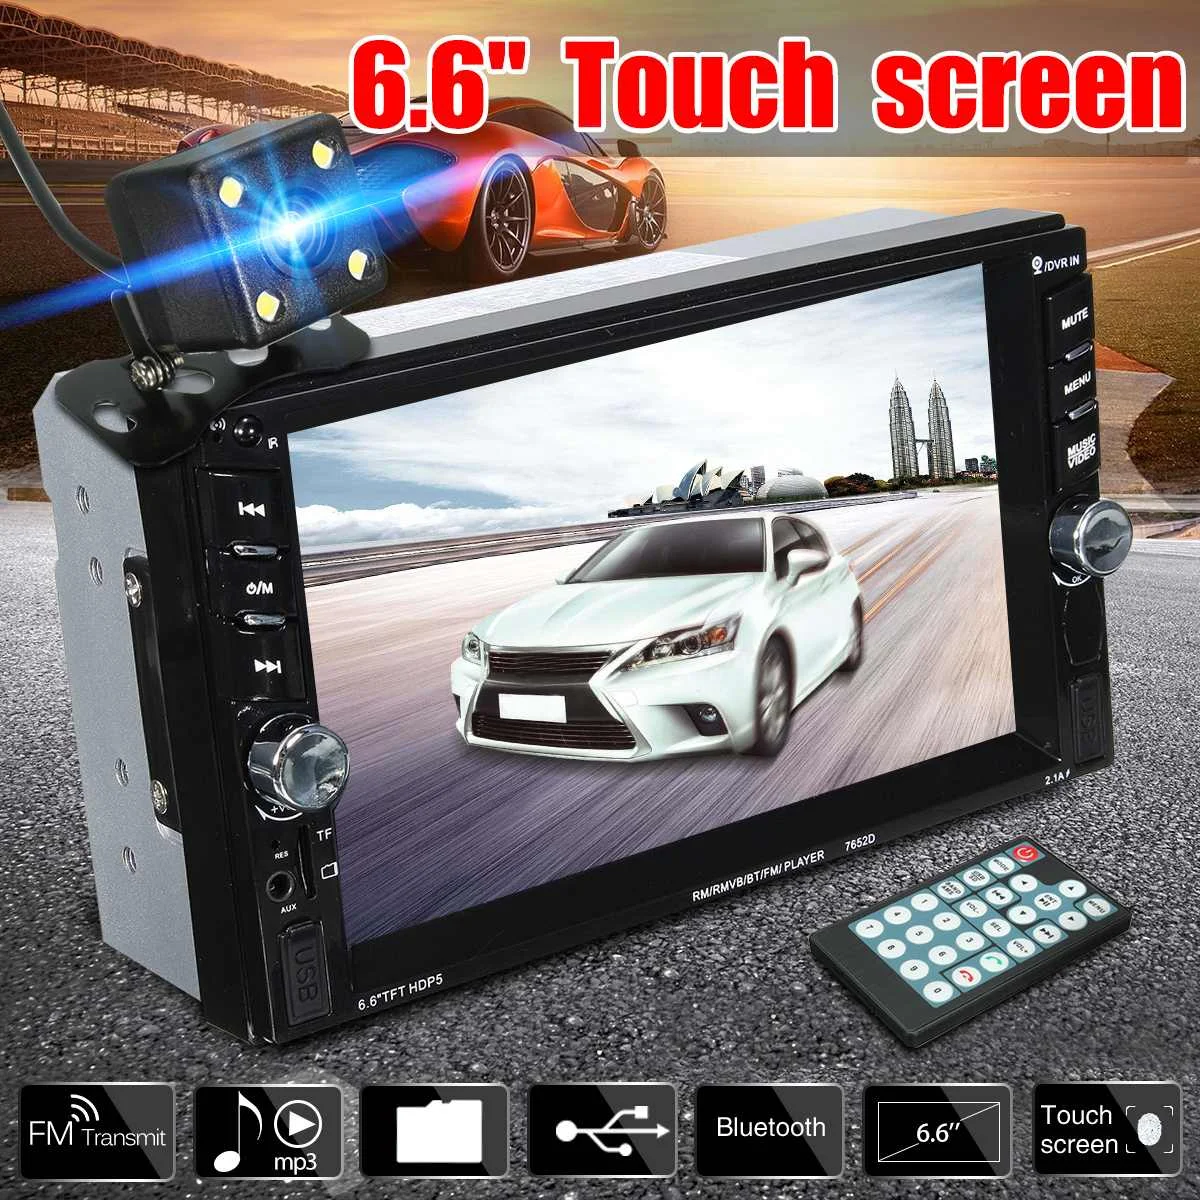 

6.6" bluetooth Touchs Screen 2 Din Car FM Radio Stereo SD TF USB MP3 MP5 Player with Rearview Camera Remote Control